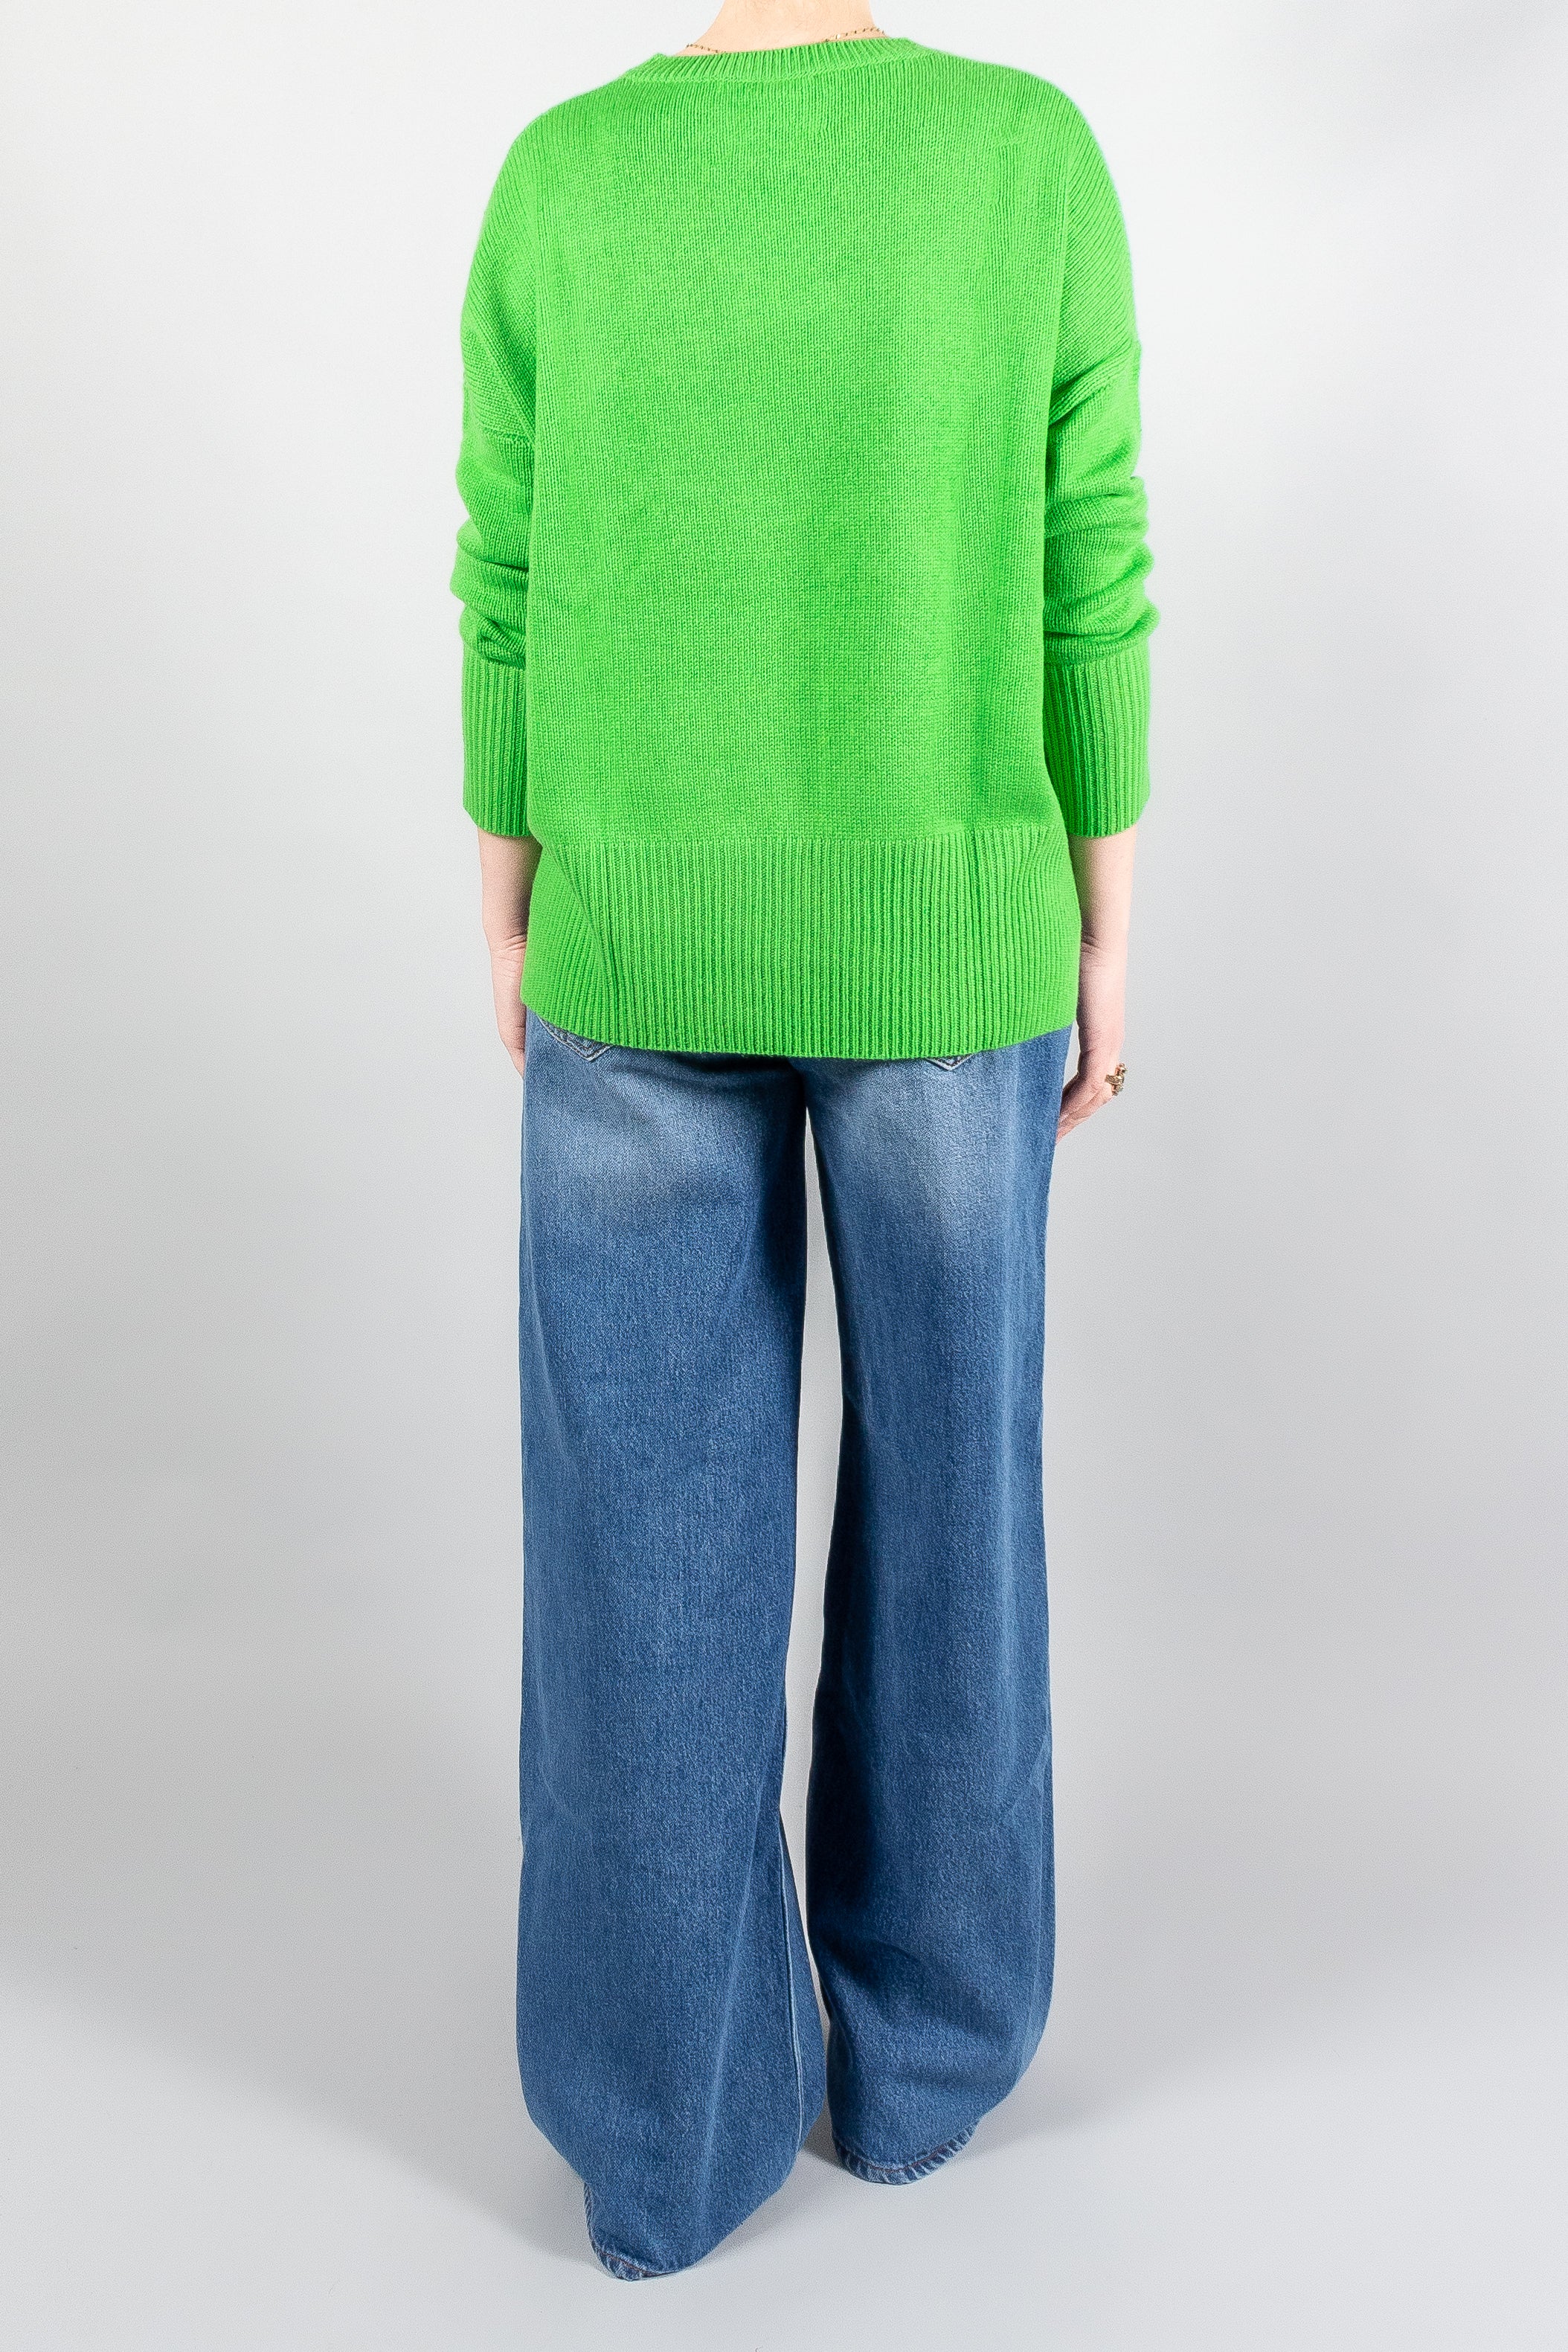 Lisa Yang Mila Sweater-Knitwear-Misch-Boutique-Vancouver-Canada-misch.ca